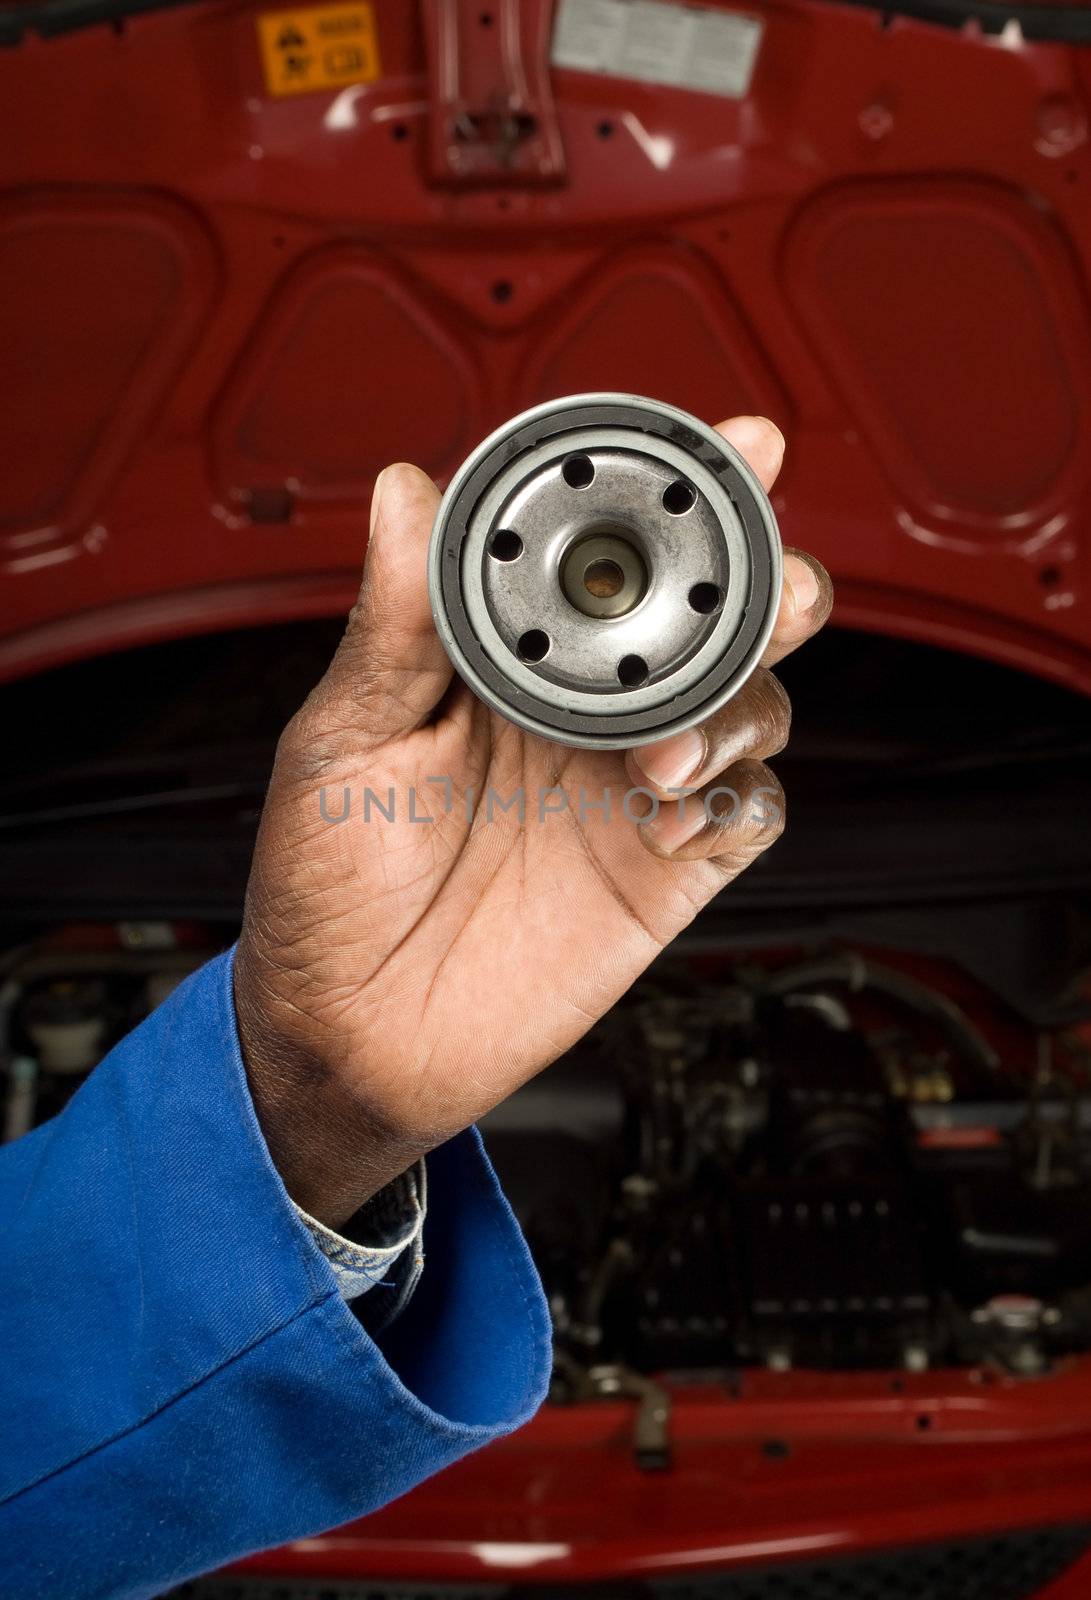 South African or American blue collar mechanic hand with oil filter service car maintenance